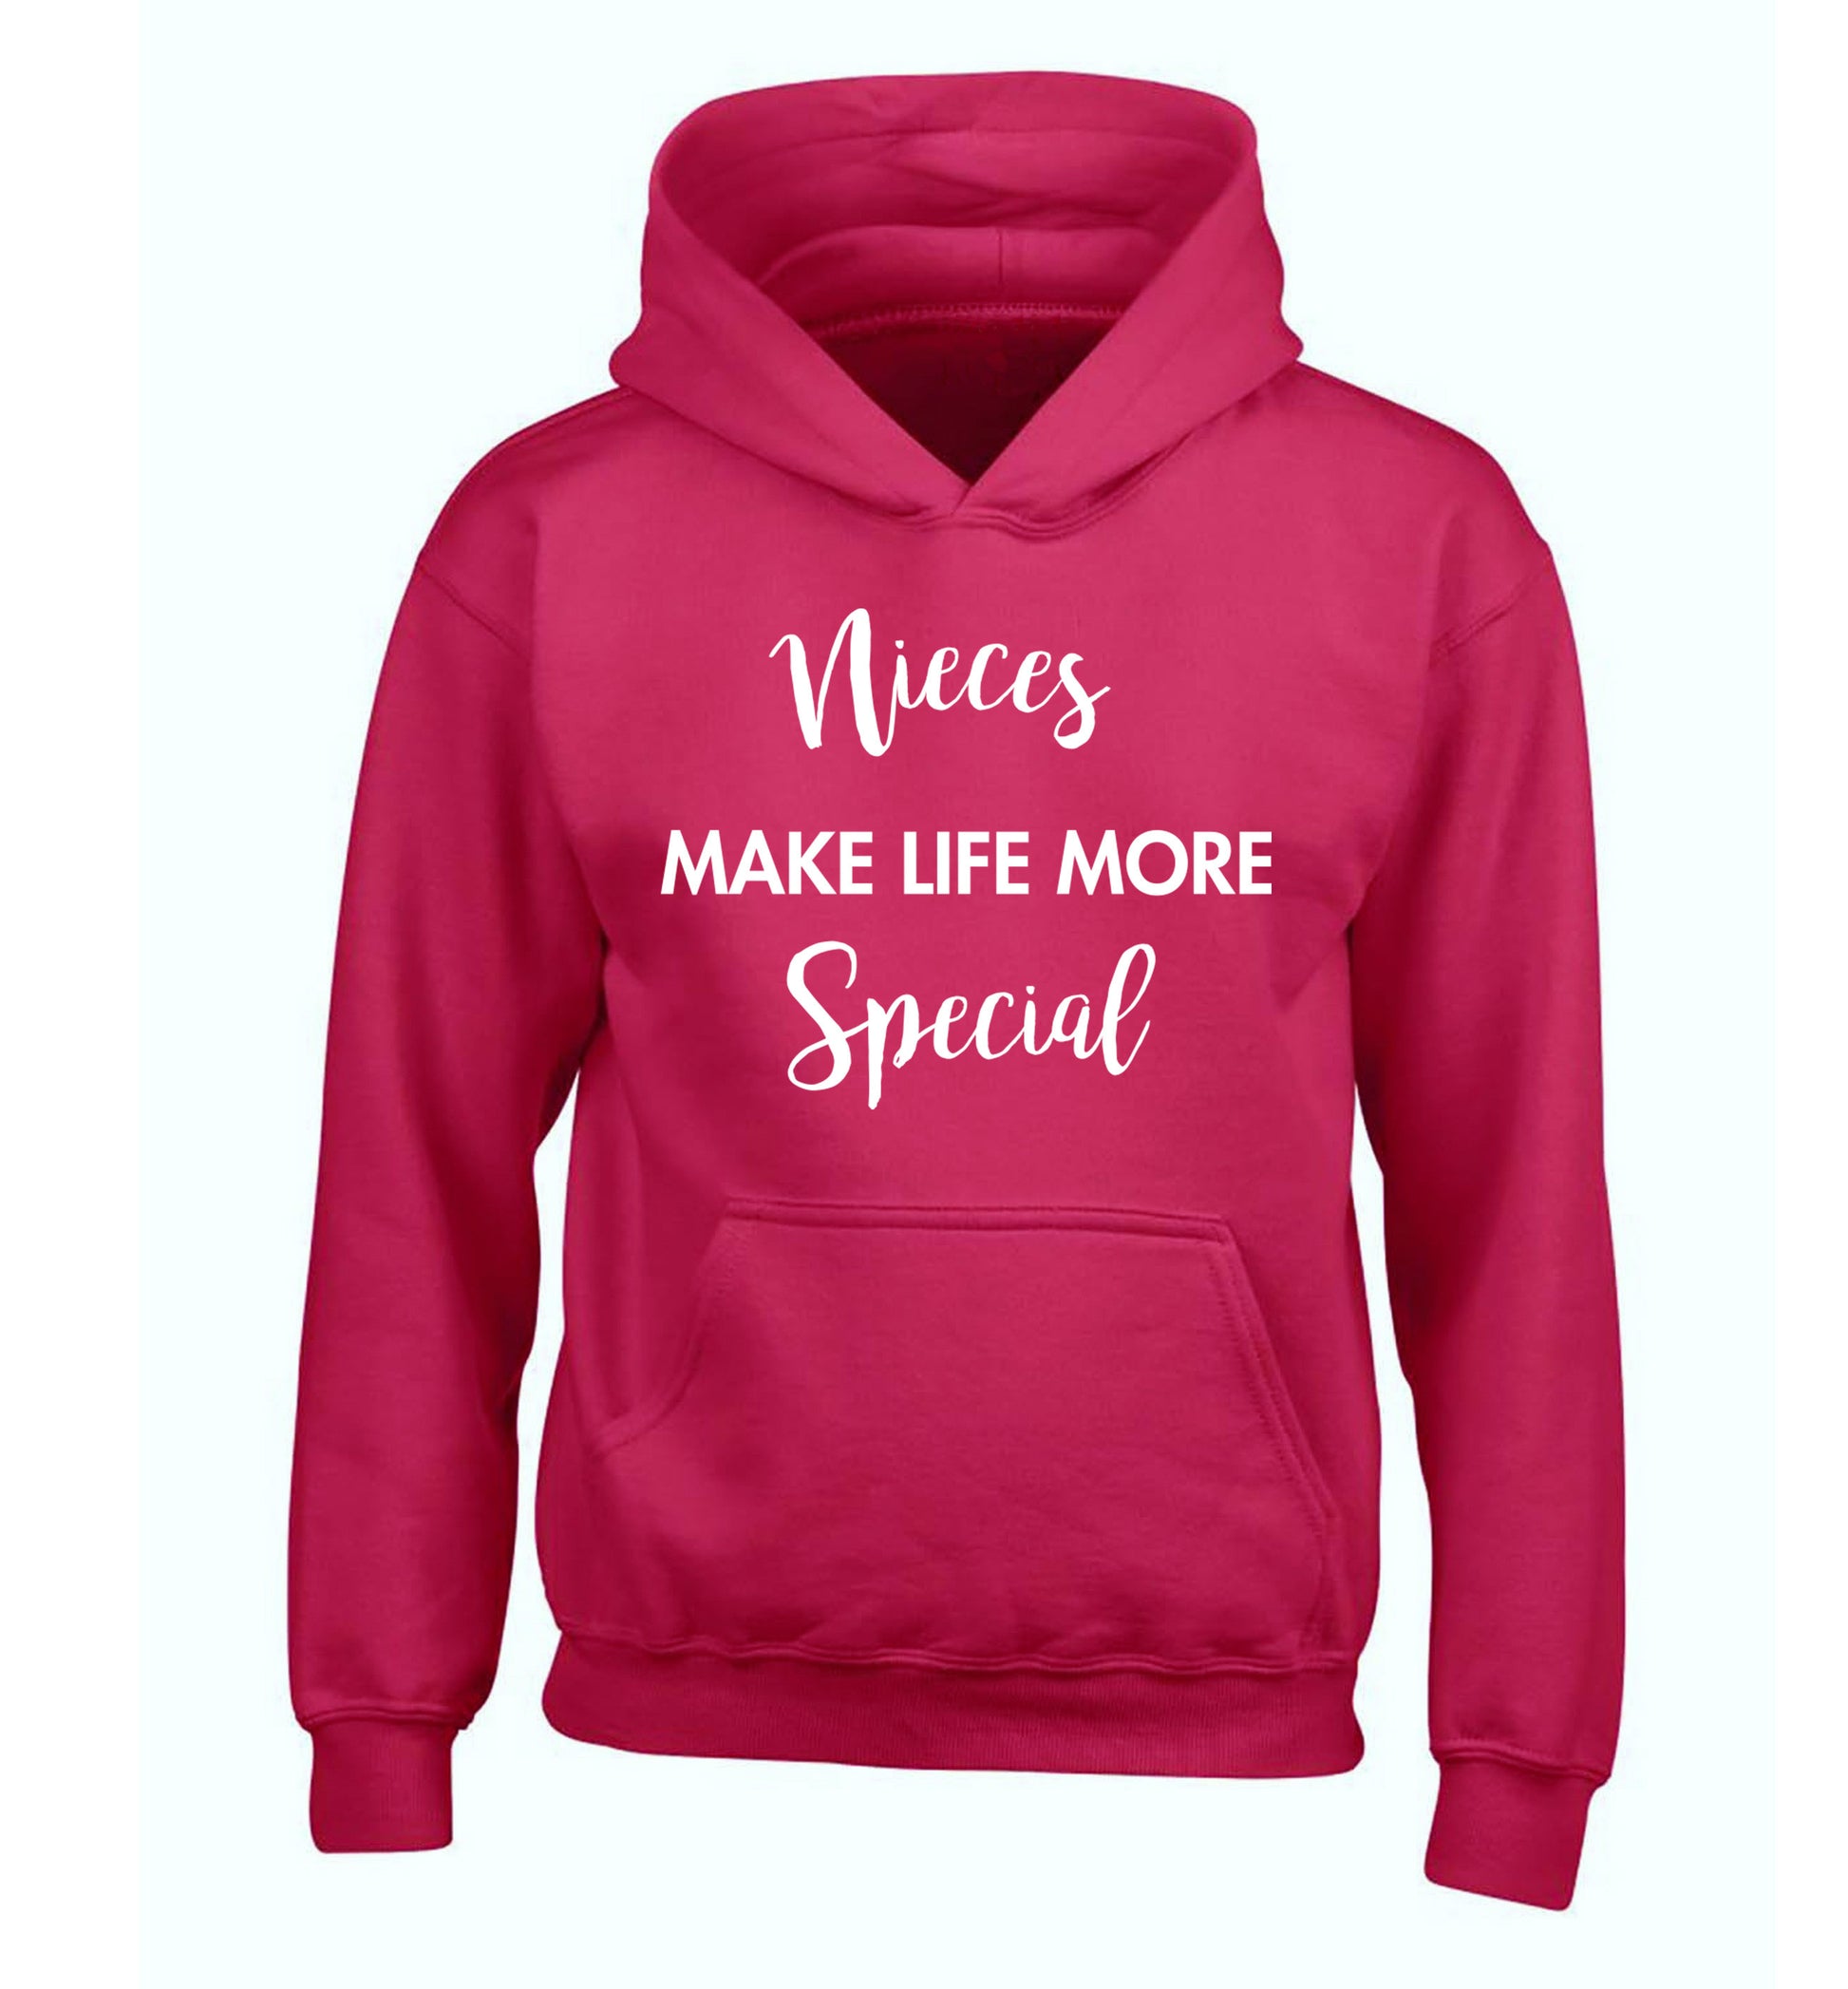 Nieces make life more special children's pink hoodie 12-14 Years